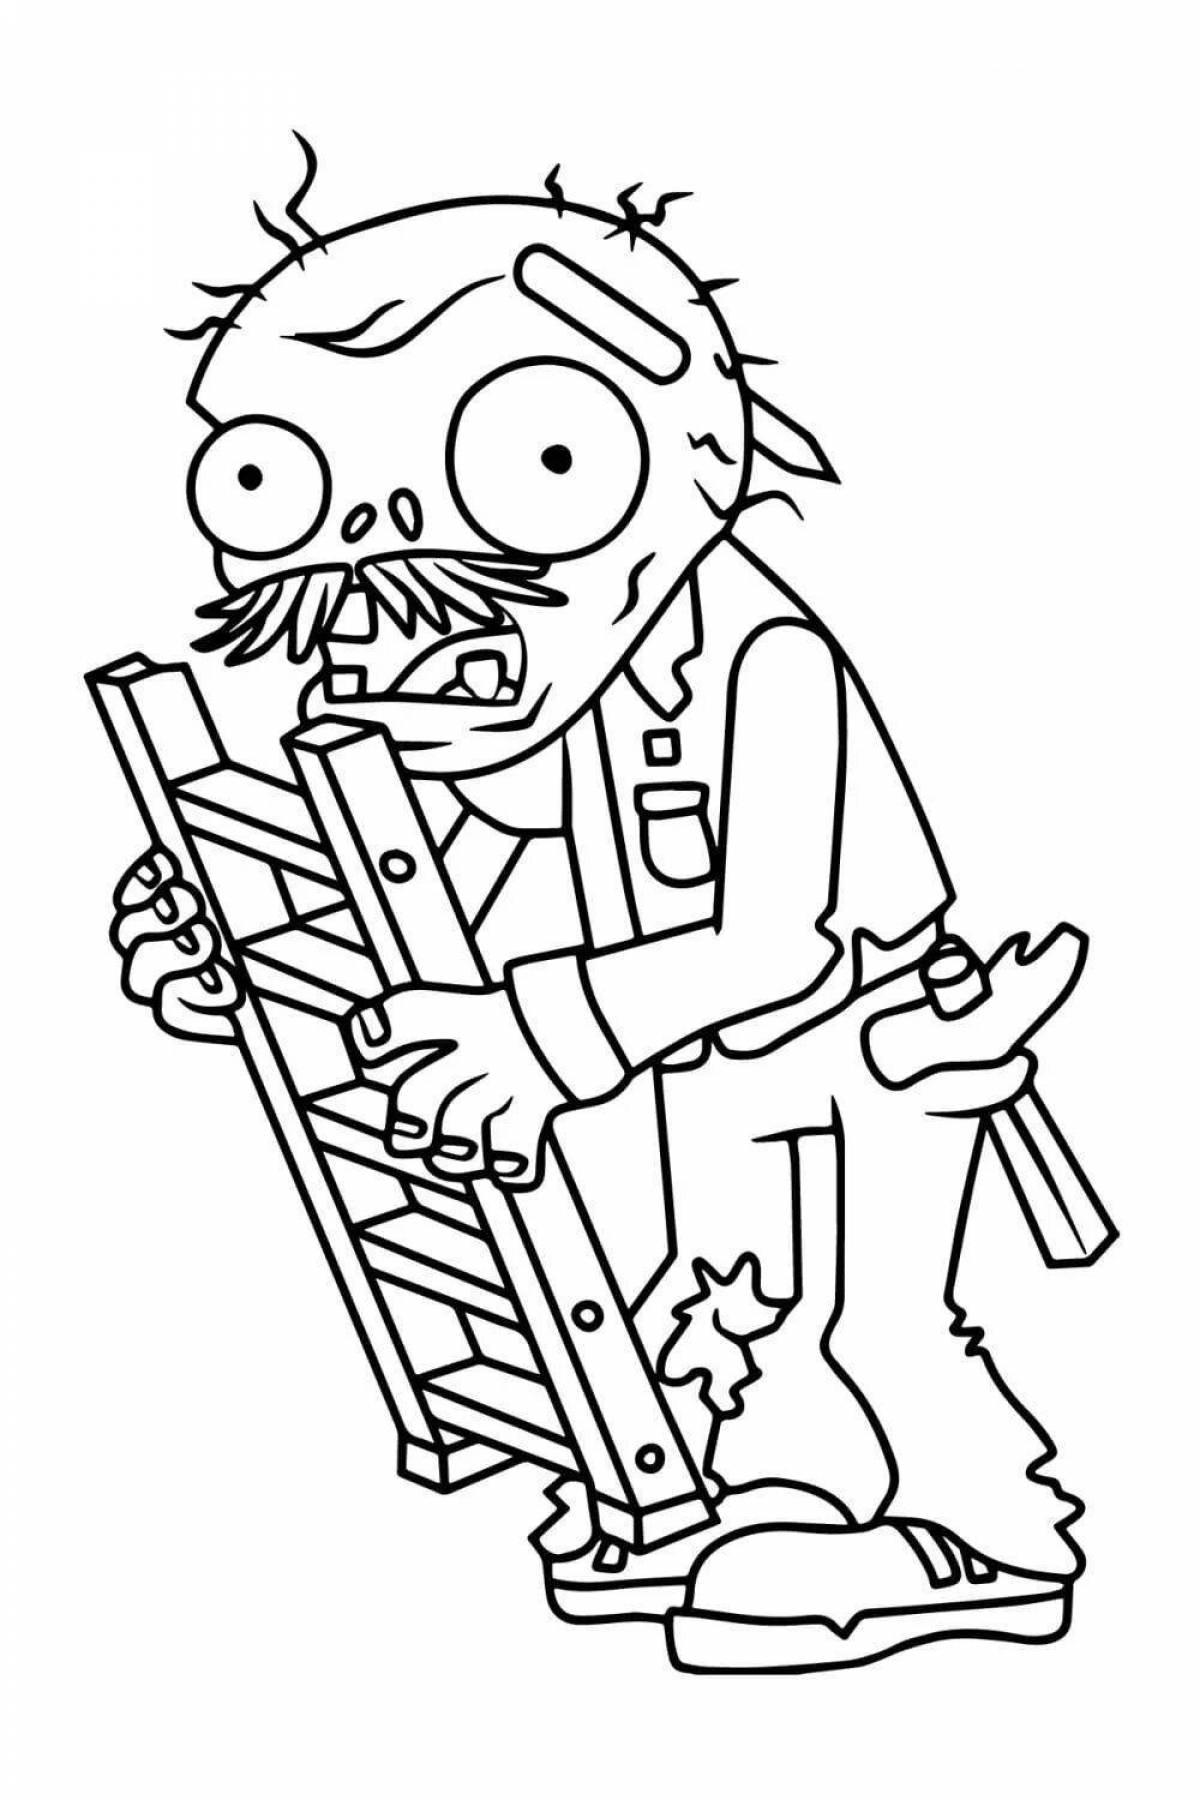 Terrifying zombie coloring page